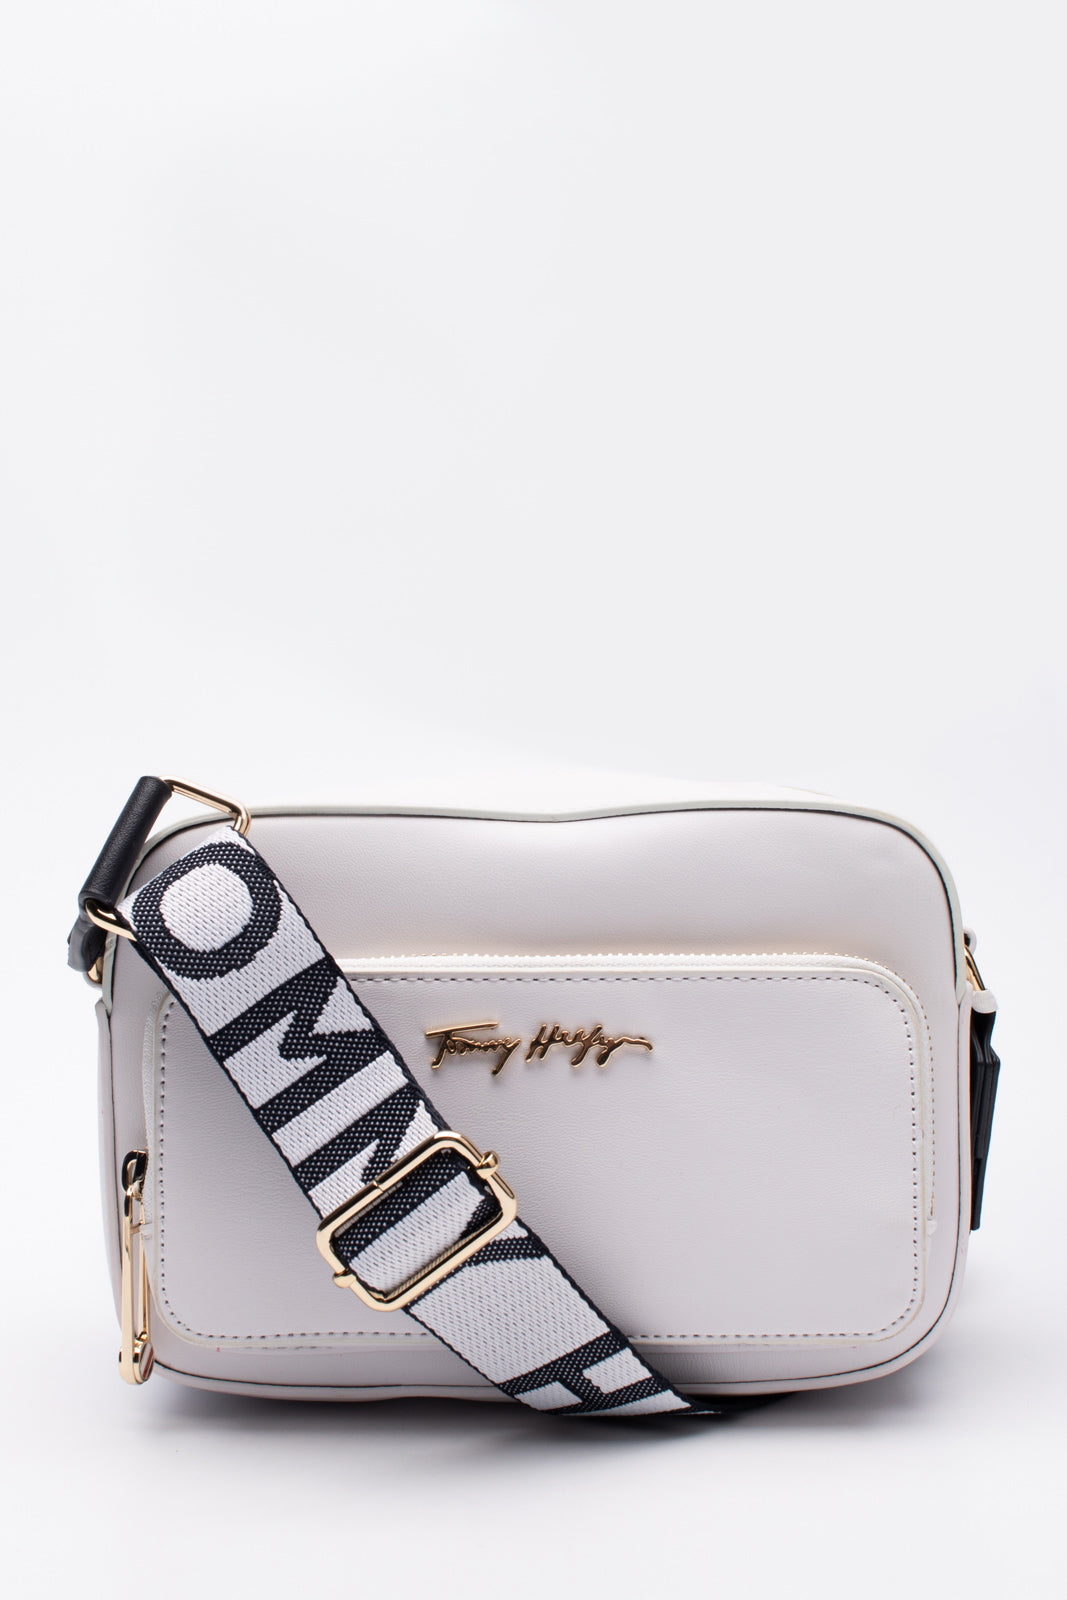 TOMMY HILFIGER ICONIC TOMMY CAMERA Shoulder Bag PU Leather Jacquard Strap Zipped gallery main photo